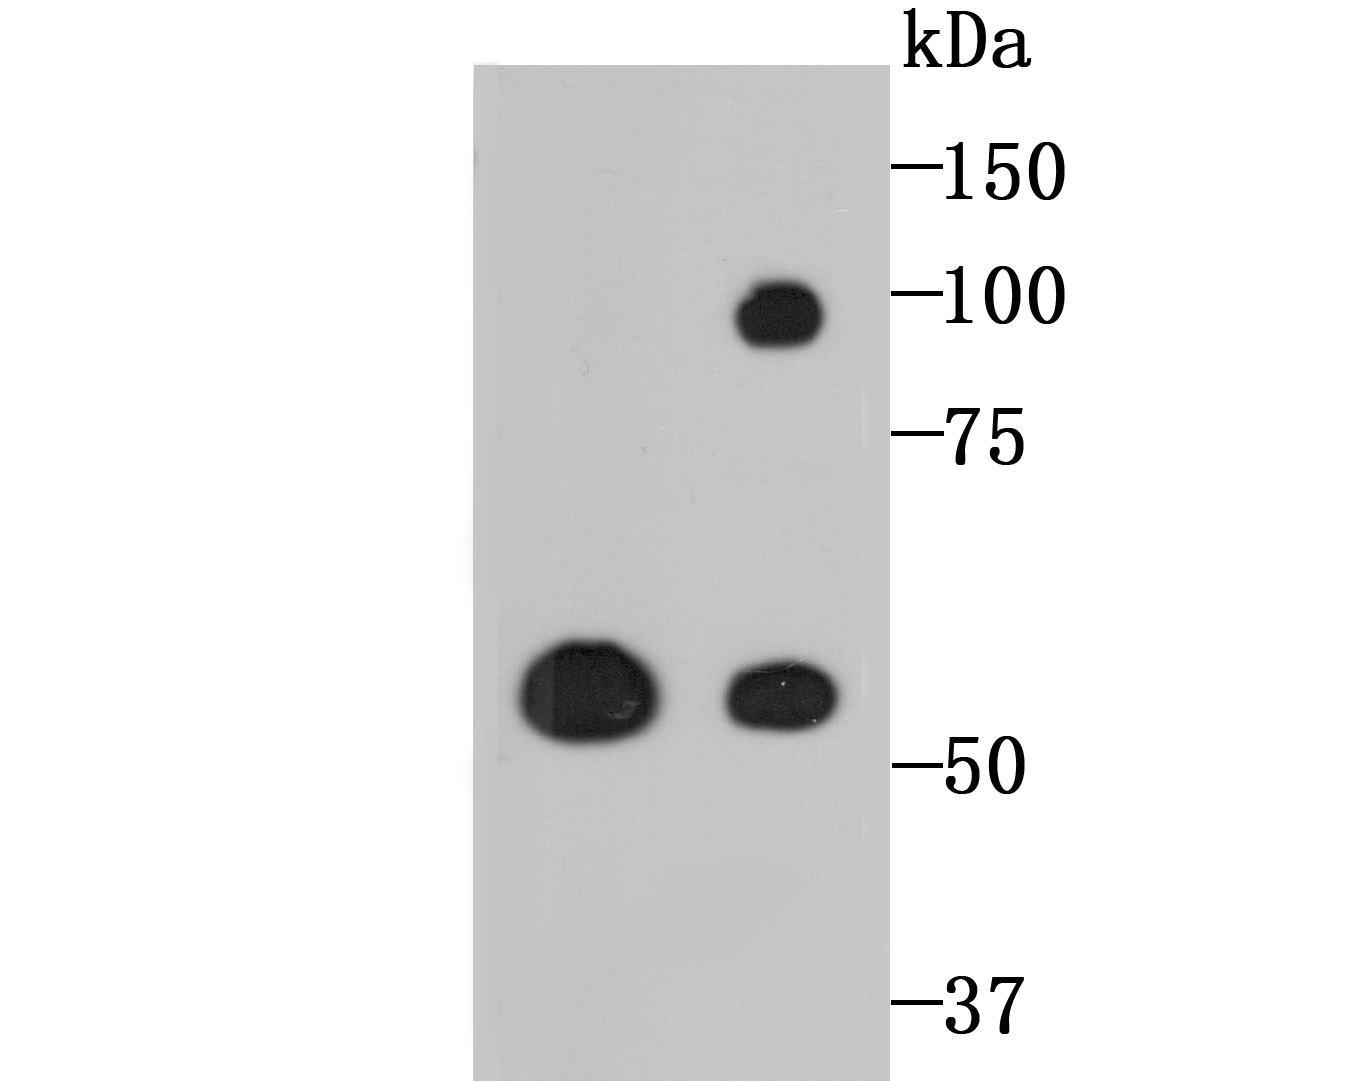 Western blot analysis of LOXL2 on different lysates. Proteins were transferred to a PVDF membrane and blocked with 5% BSA in PBS for 1 hour at room temperature. The primary antibody (ET1706-11, 1/500) was used in 5% BSA at room temperature for 2 hours. Goat Anti-Rabbit IgG - HRP Secondary Antibody (HA1001) at 1:200,000 dilution was used for 1 hour at room temperature.<br />
Positive control: <br />
Lane 1: PC-12 cell lysate<br />
Lane 2: A549 cell lysate